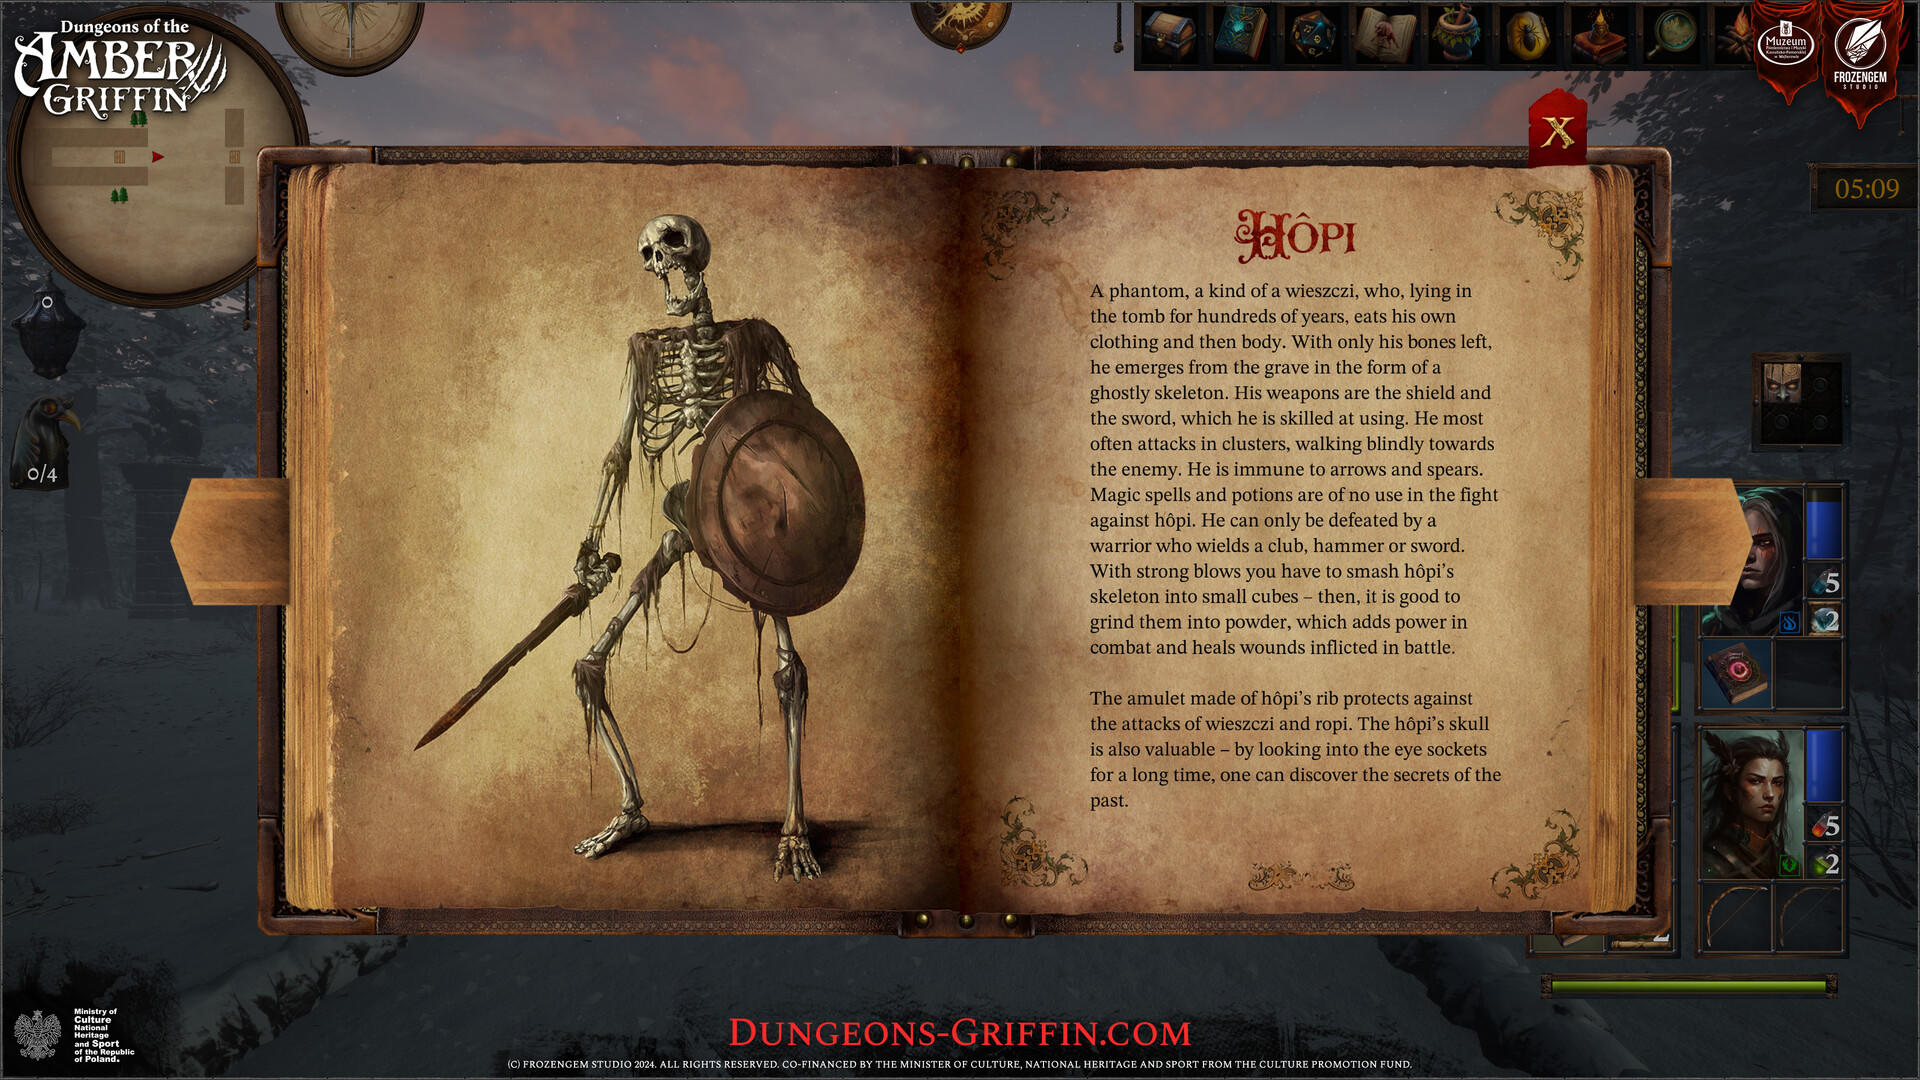 Dungeons of the Amber Griffin screenshot game